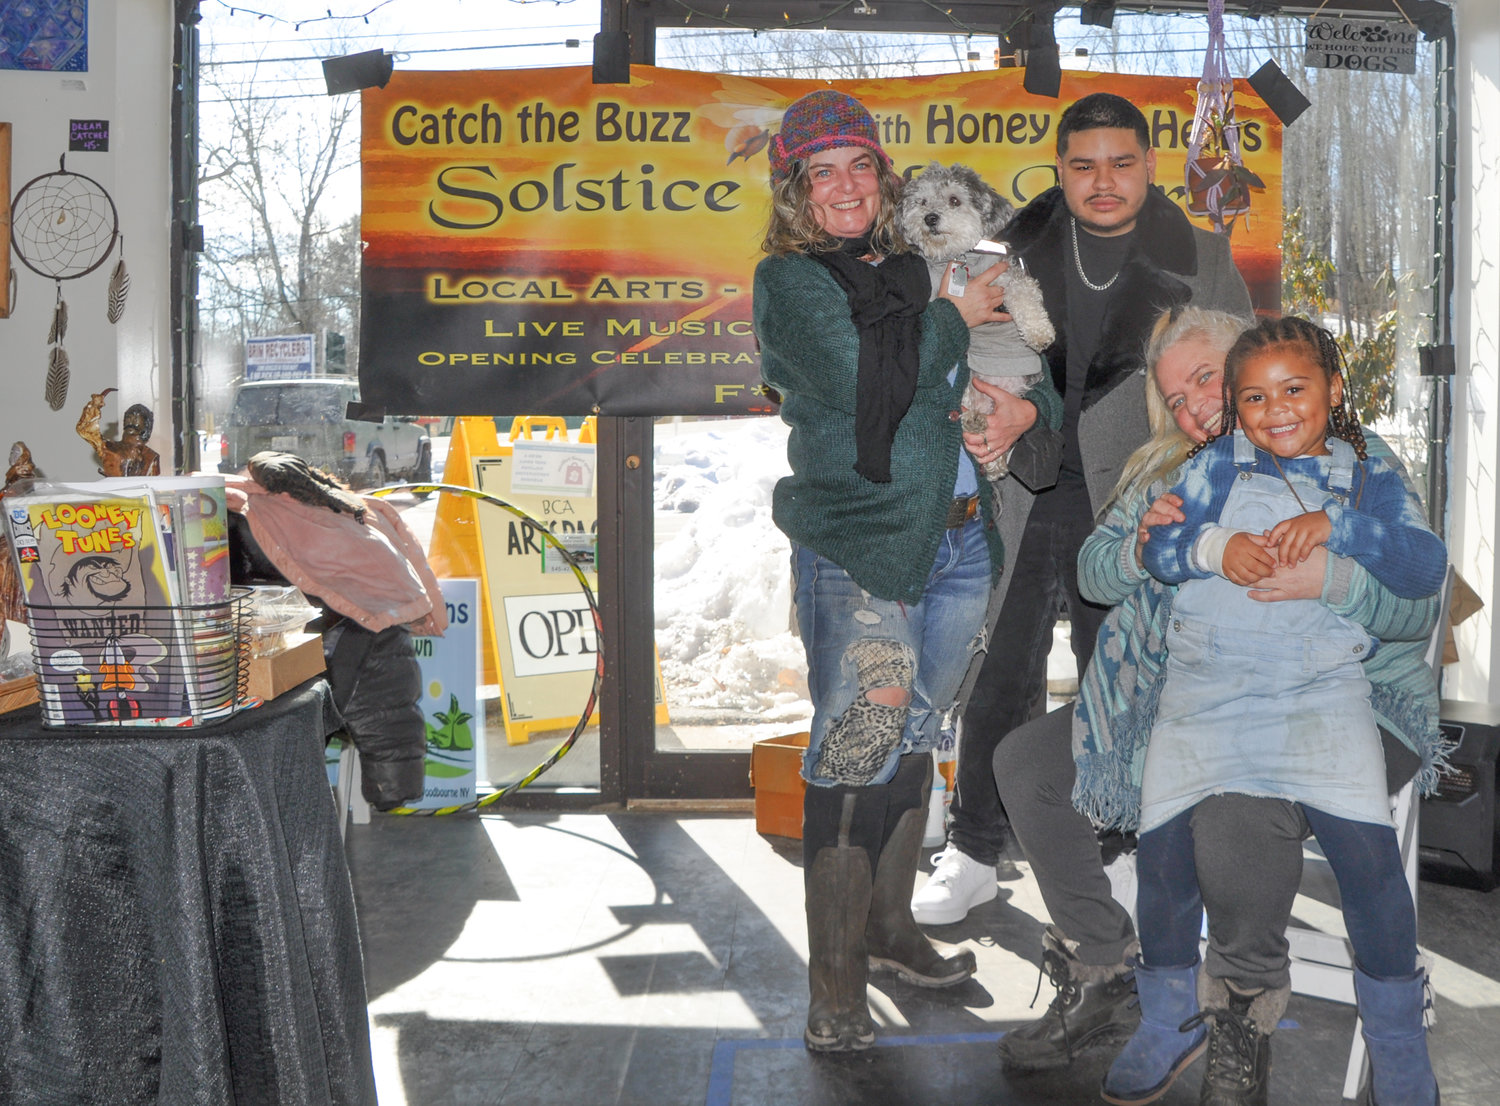 "Our goal" says Solstice Indie Mart creator Kelley Edkins, left, "is to create a space for local artists, makers and musicians of the Catskill Mountains, honoring the peace, love and hippie vibe of the Woodstock generation." Here Edkins is pictured with some of her crew—Justice Mazzotti, Indie Mart supervisor Tami Edkins Swanson, three year-old Kaleigh and the ever-present Dharma the Wonder Dog.